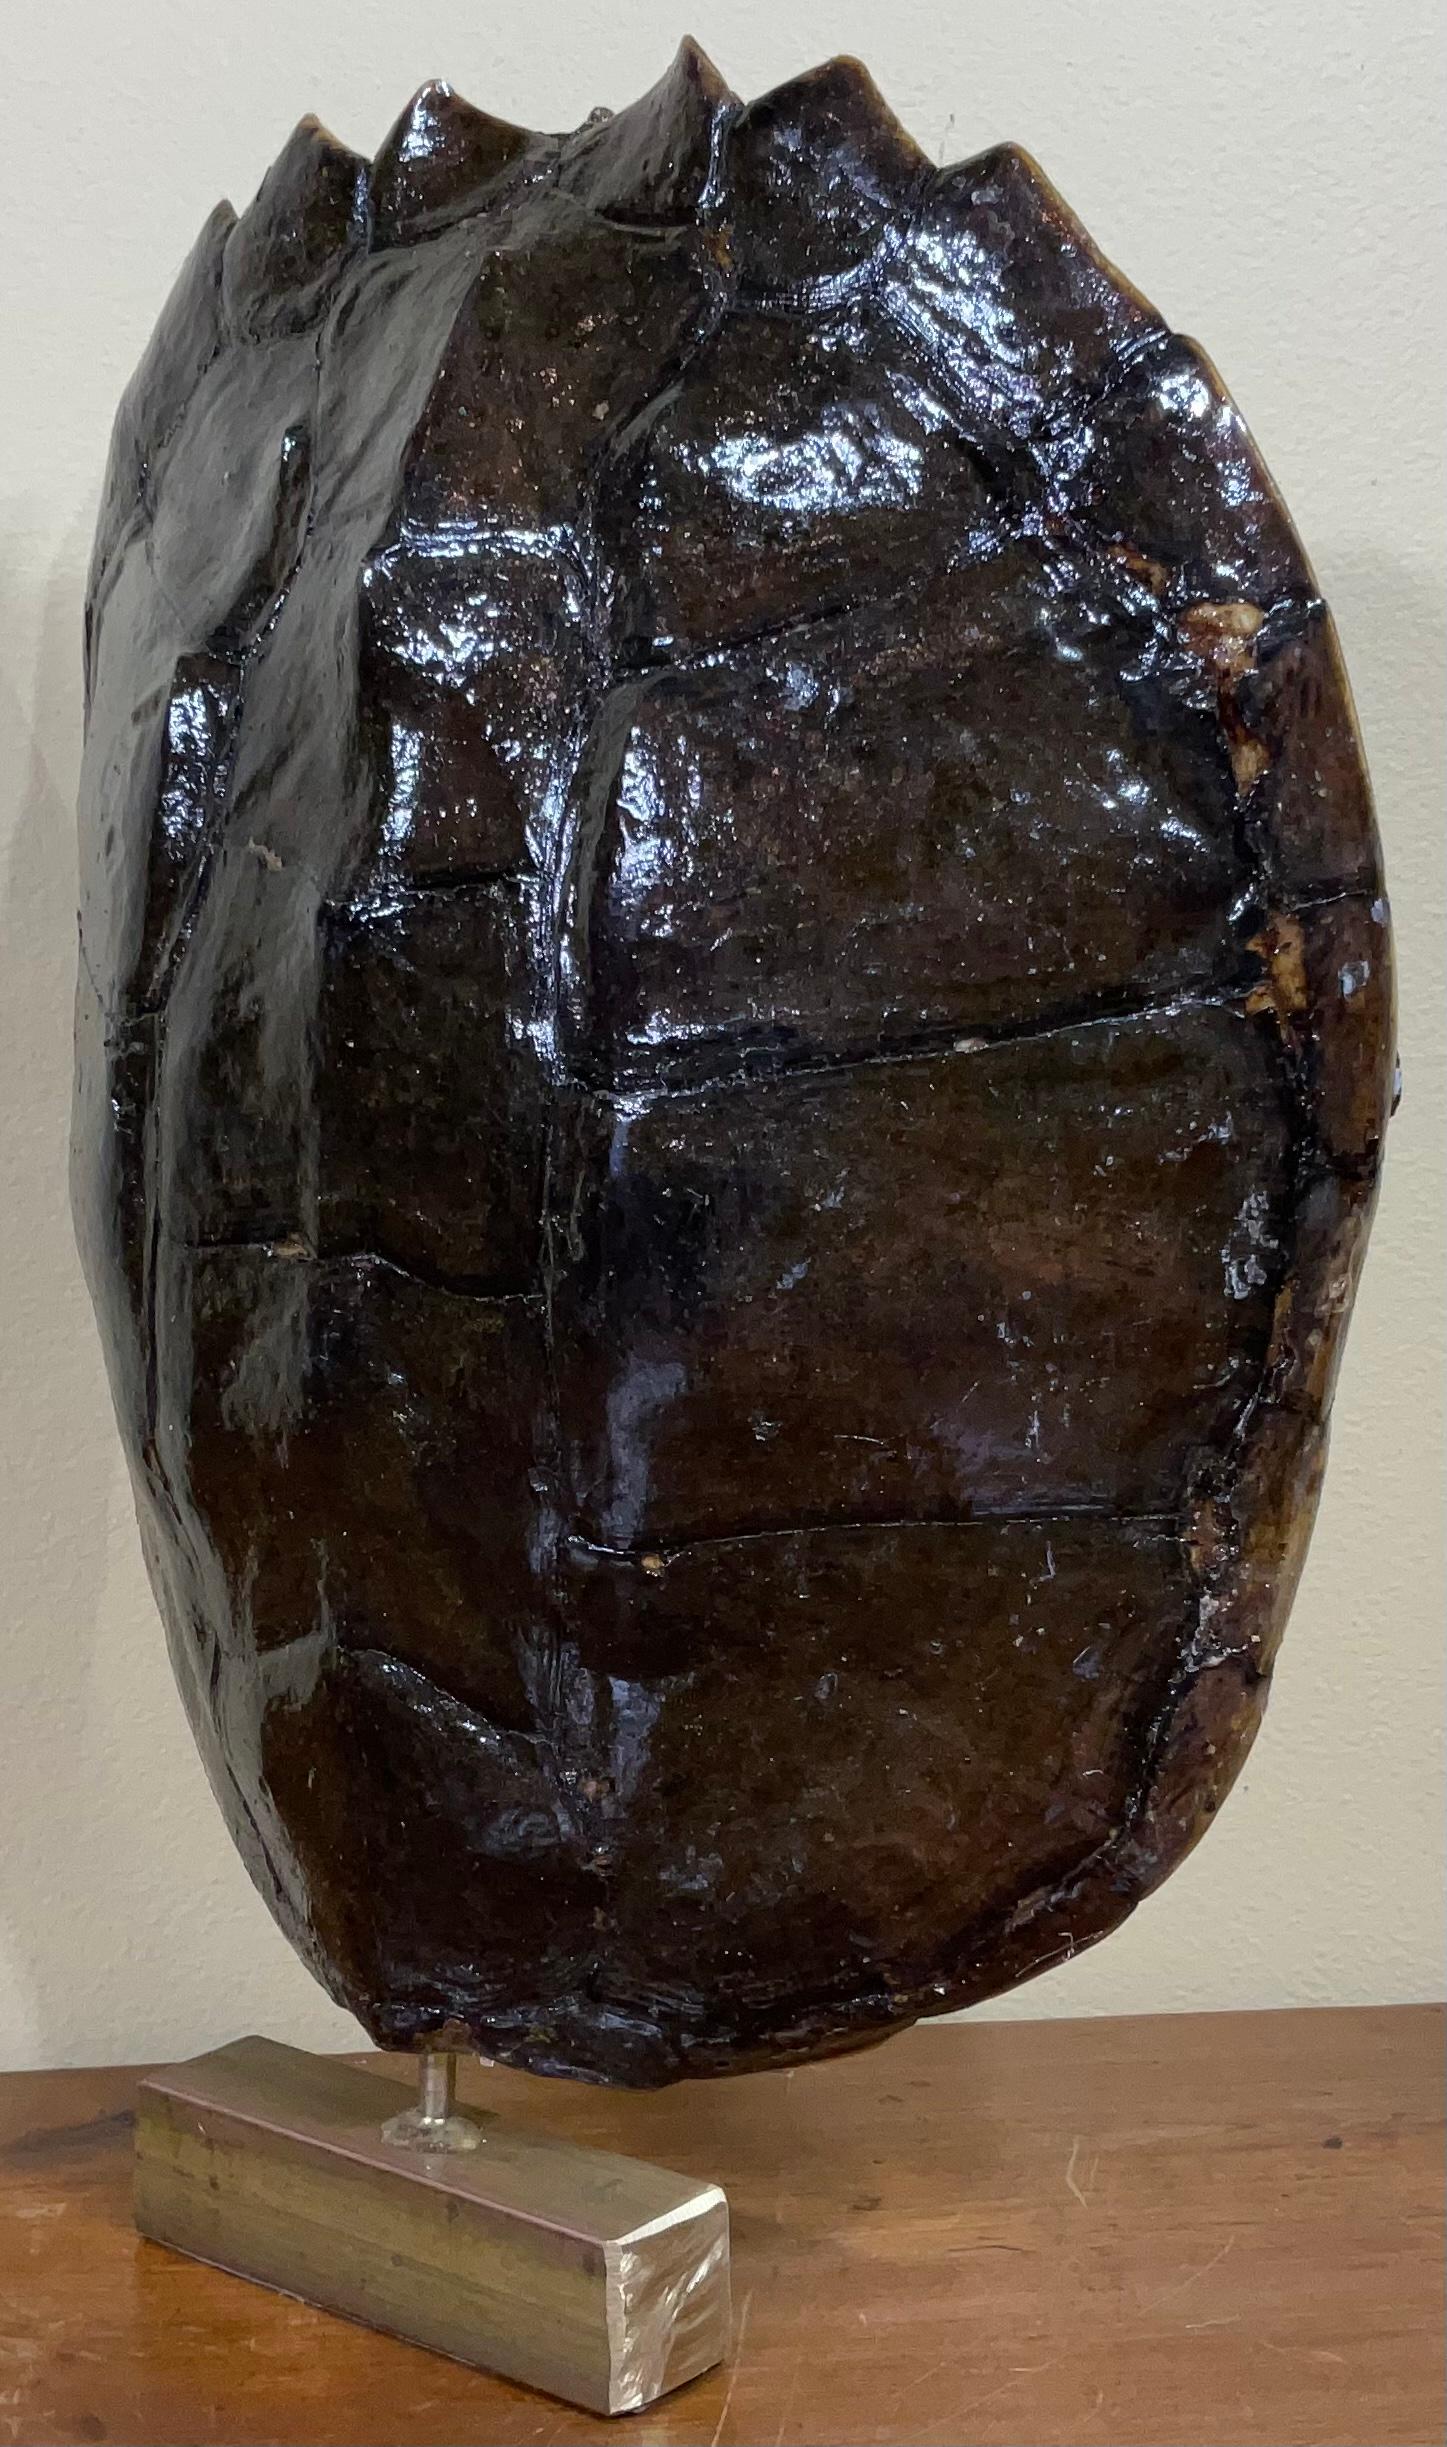 Decorative fresh water turtle shell professionally mounted on solid brass base, the shell is cleaned and seal with clear protective satin finish.
And the back is upholstered with fine fabric. Beautiful natural piece of art for display.